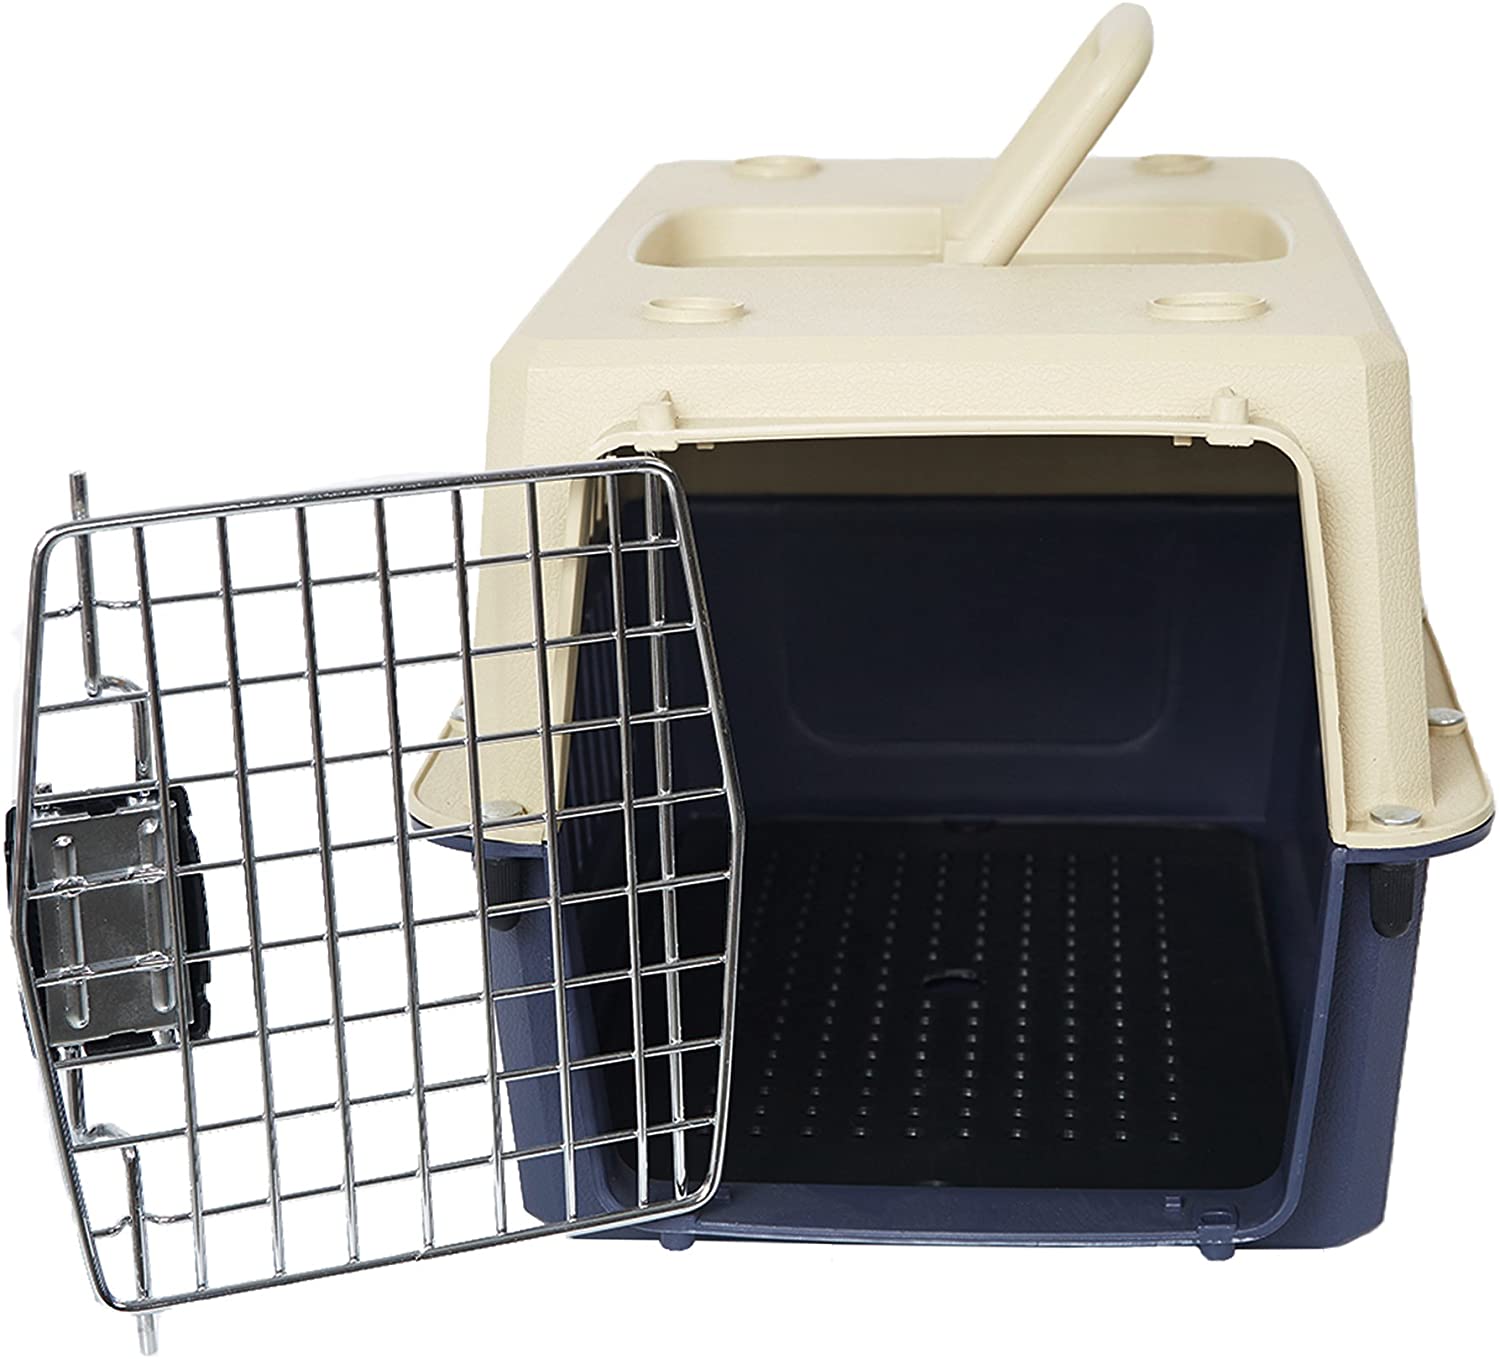 Small Plastic Cat & Dog Carrier Cage Blue Portable Pet Box Airline Approved Pet Kennel 16.5lbs Weight Capacity